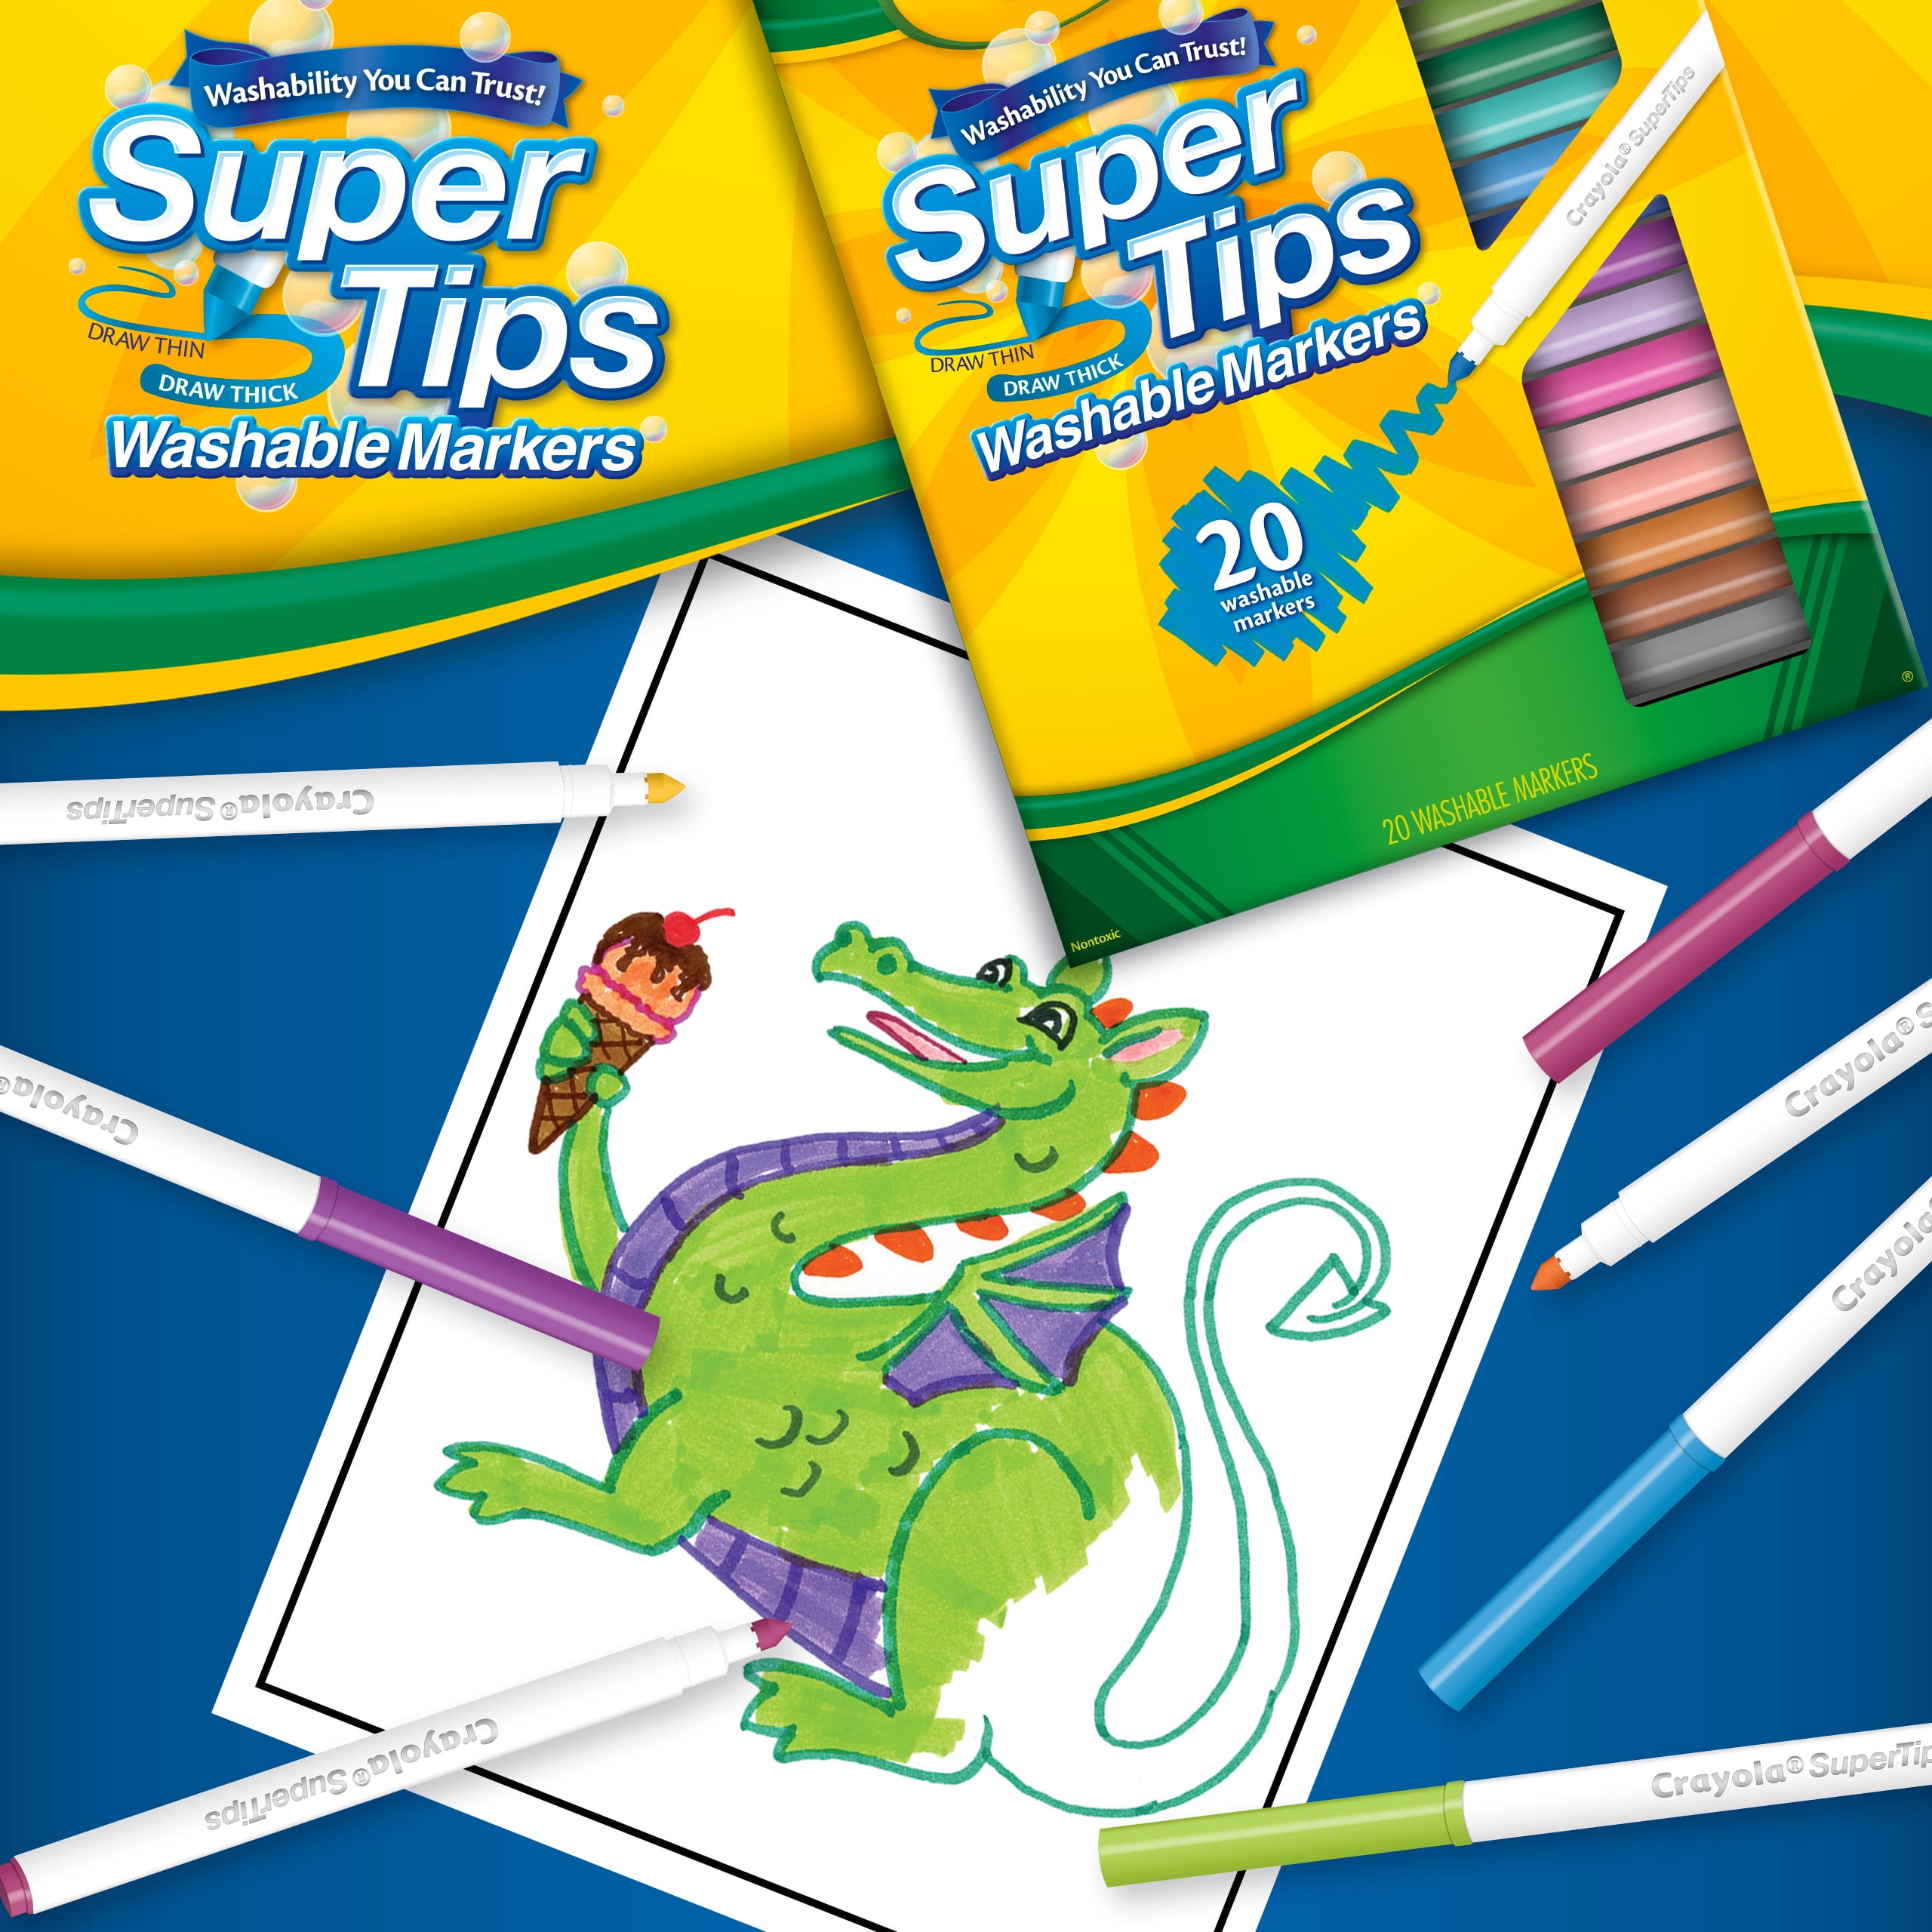 Crayola Super Tips Washable Markers~ 20 Ct Pack~ Draw Thin & Thick~ NEW! -  BND Treasure Chest